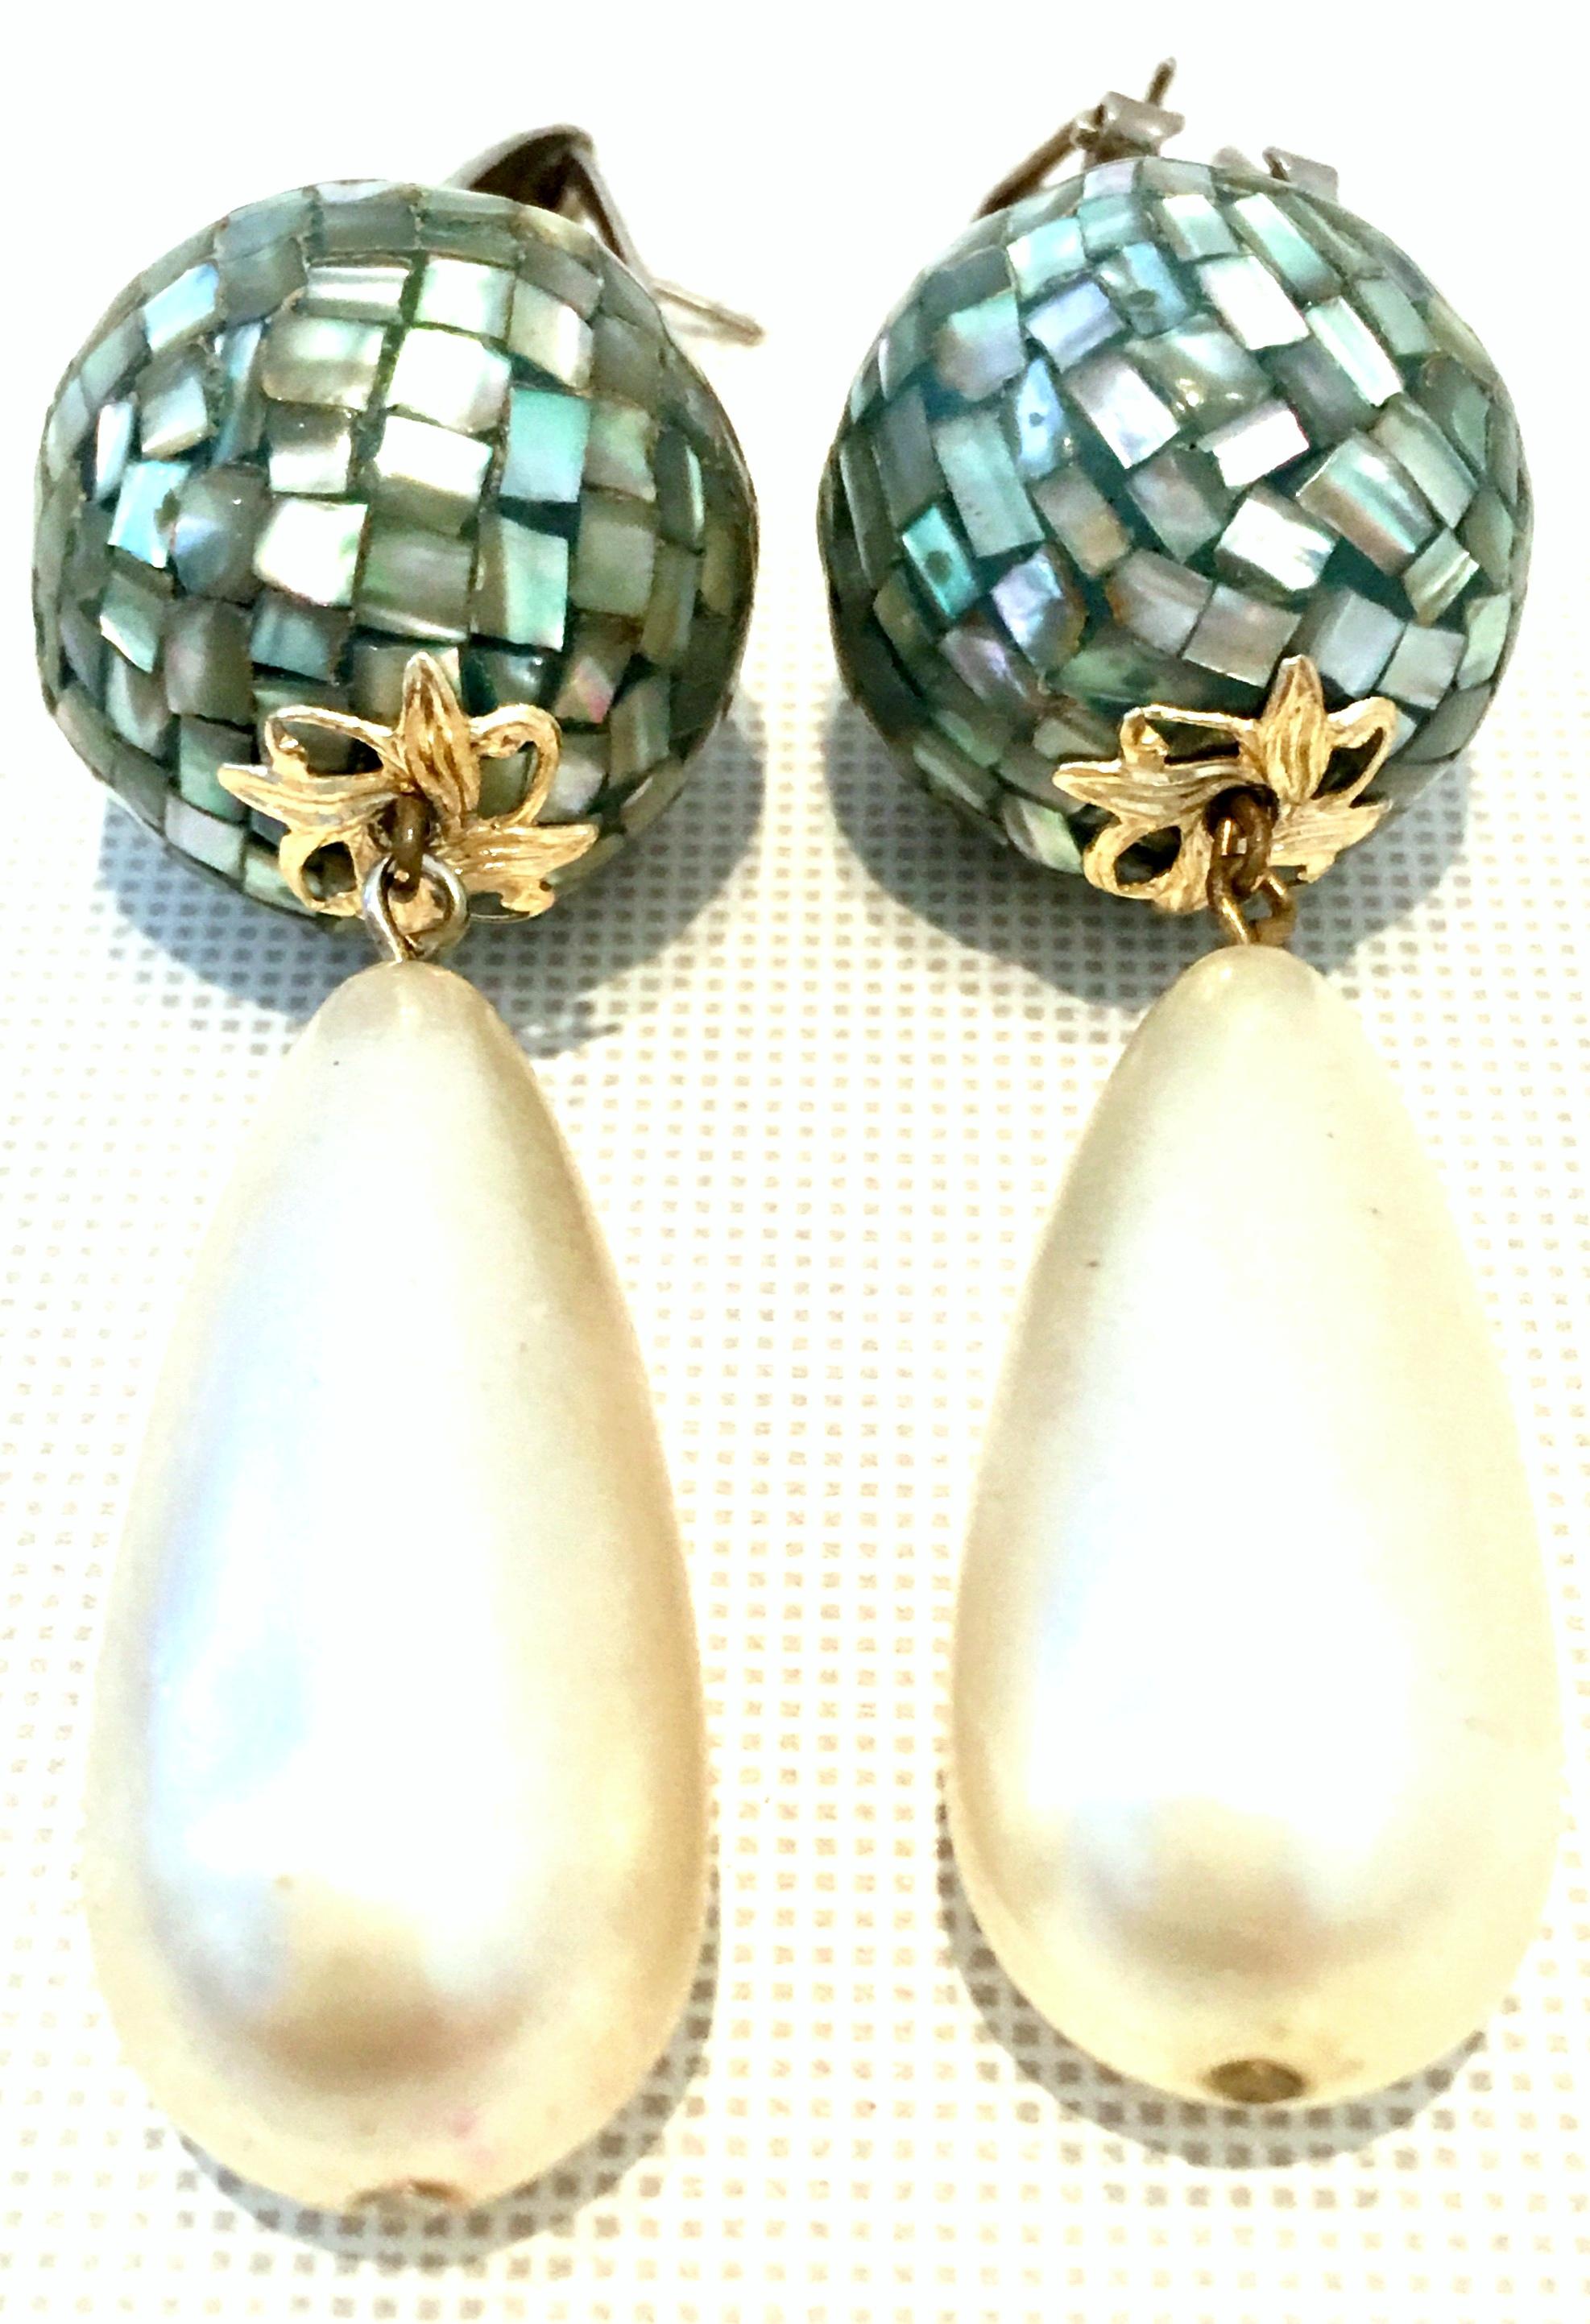 20th Century Monumental Mosaic Abalone Shell & Faux Pearl Drop Pierced Earrings. Features two-tone silver & gold with round mosaic abalone and large faux pearl drops. The size of each pearl is approximately, 1.5